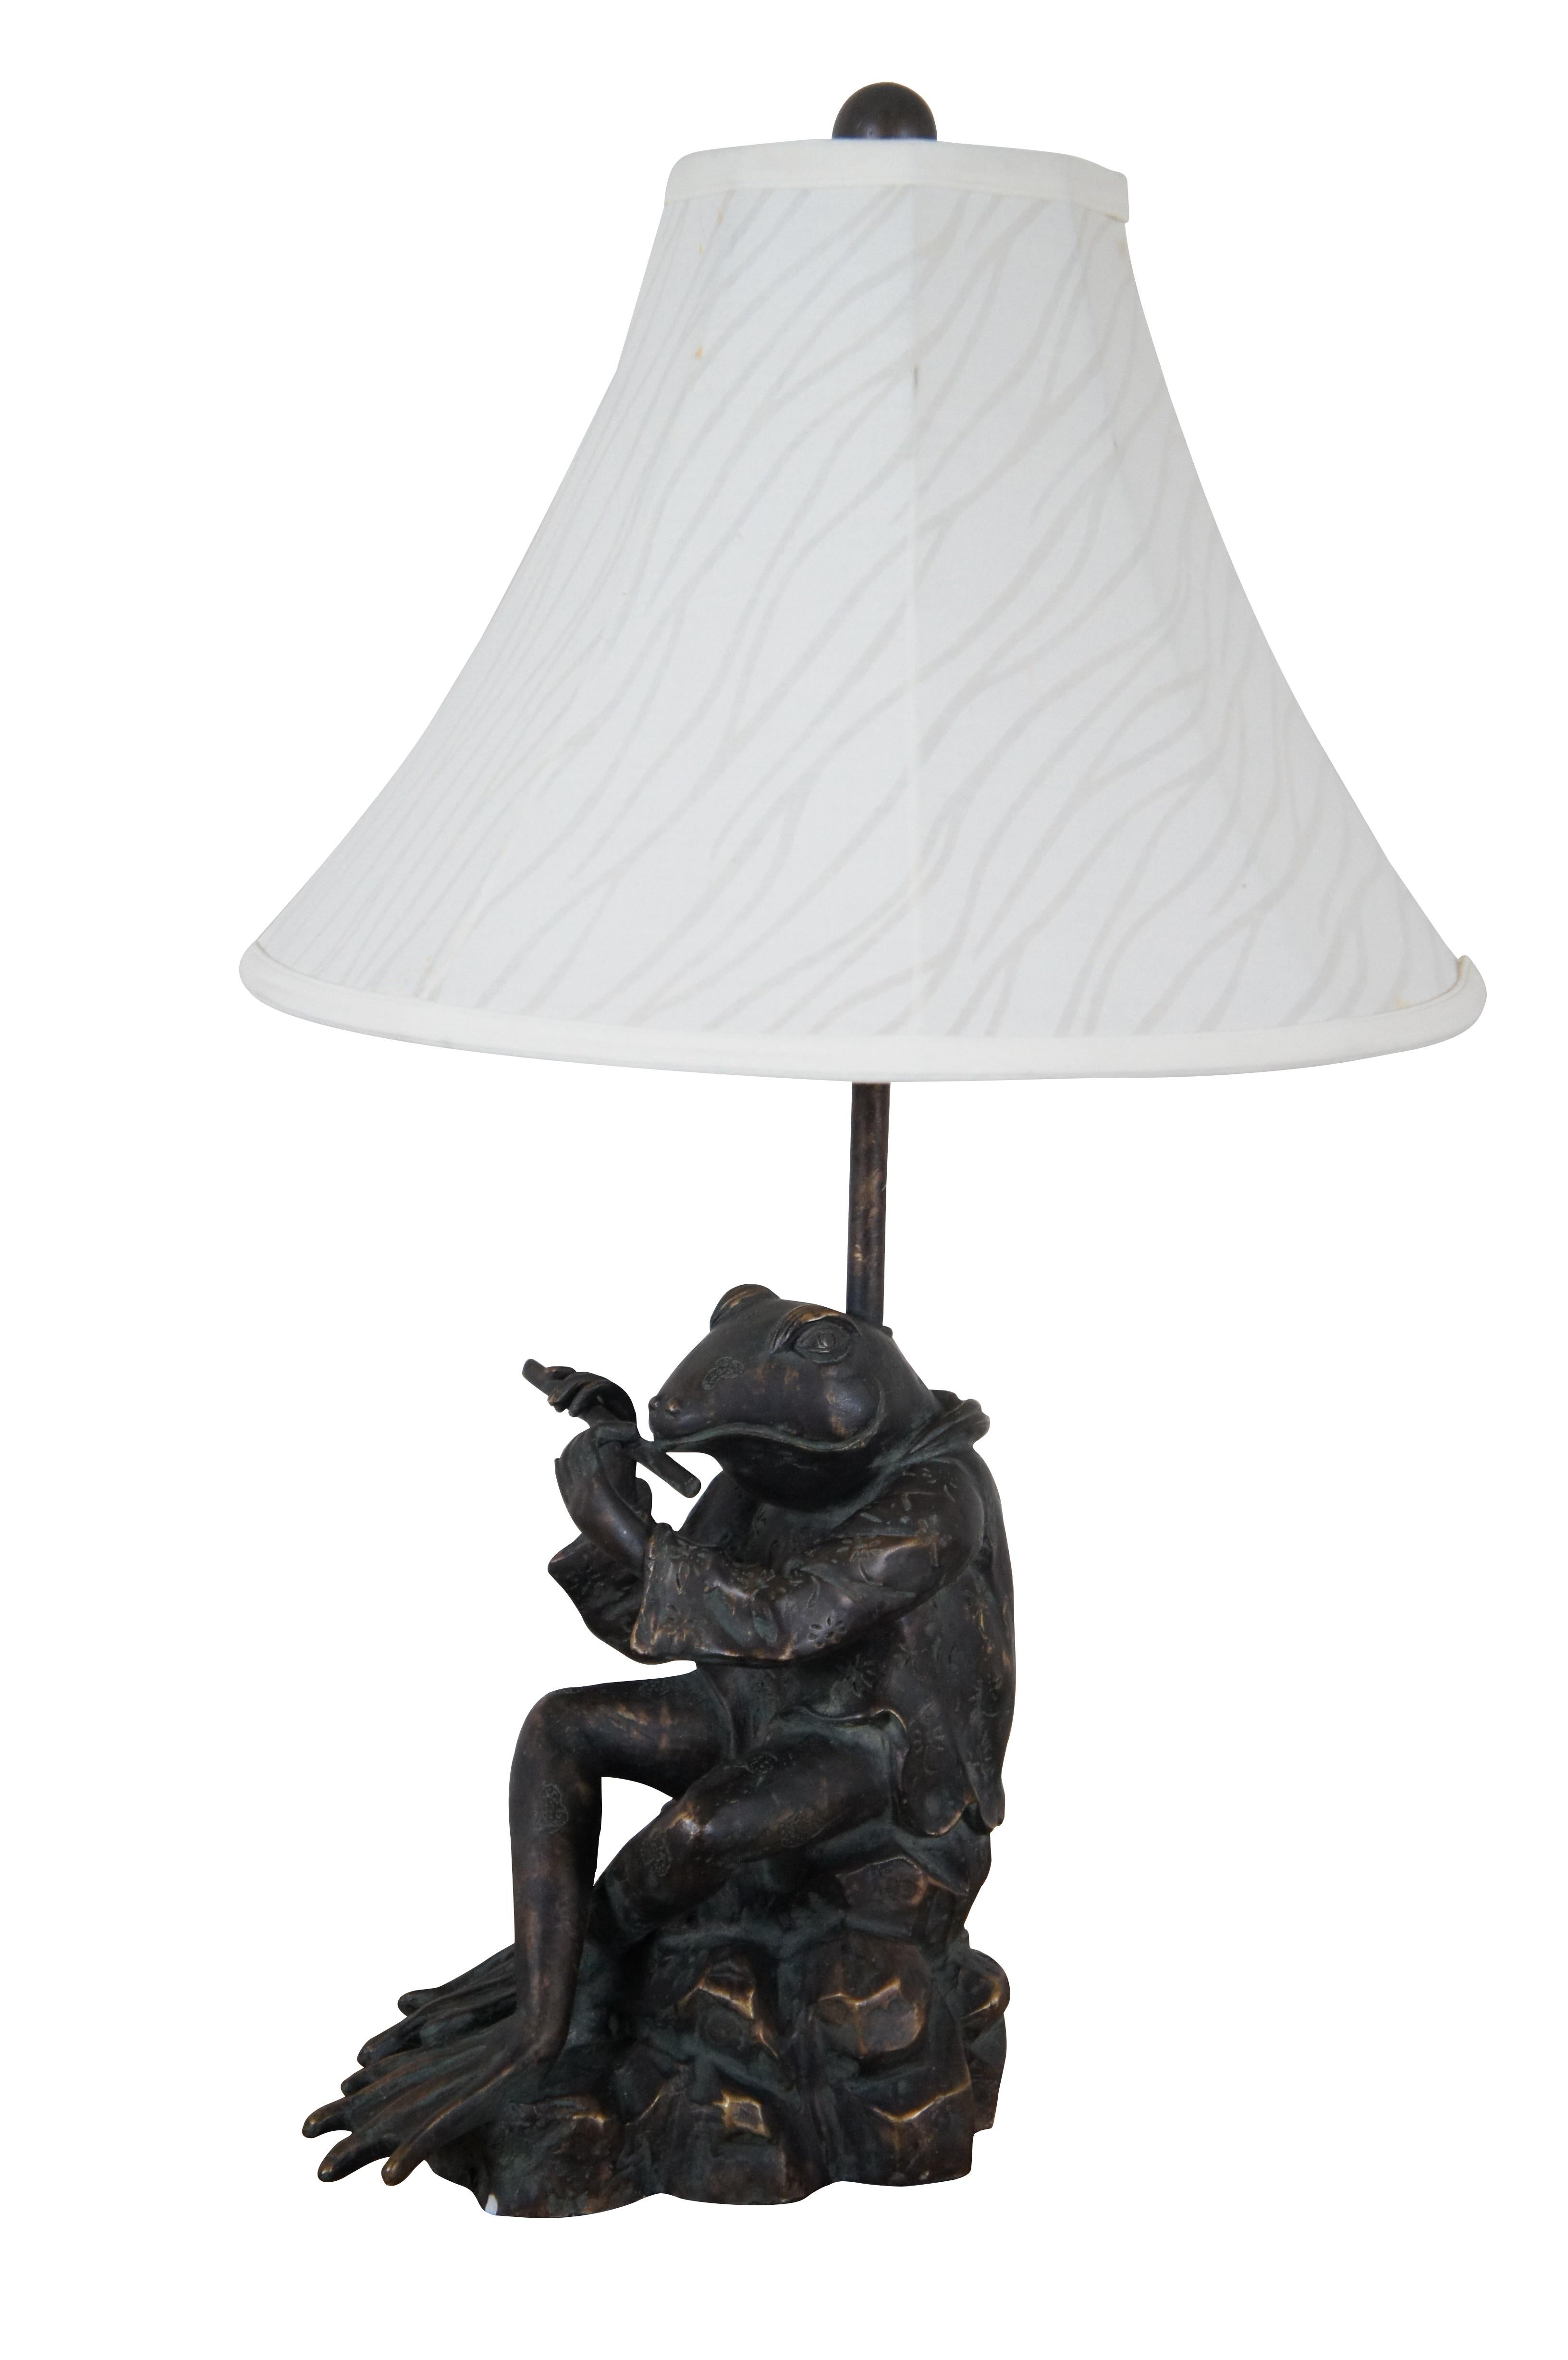 Sculptural composition table lamp in  the shape of a bronzed anthropomorphic frog, dressed in a short patterned Japanese kimono jacket and playing a flute.  Includes a white zebra patterned cloth shade and wood ball finial.

Dimensions:
9.75